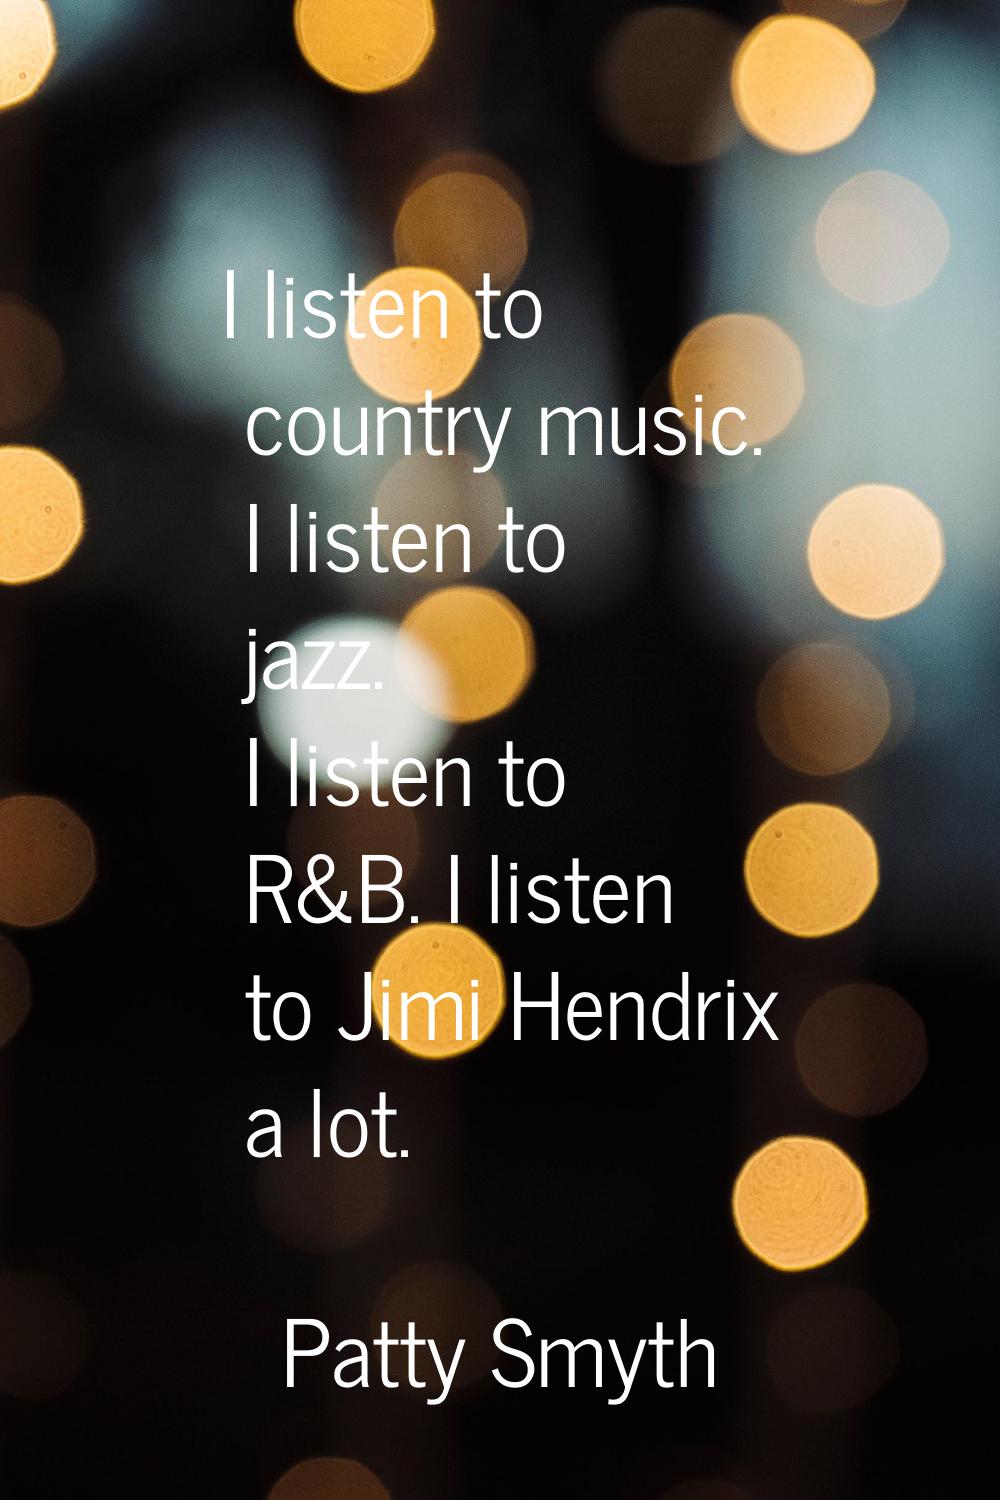 I listen to country music. I listen to jazz. I listen to R&B. I listen to Jimi Hendrix a lot.